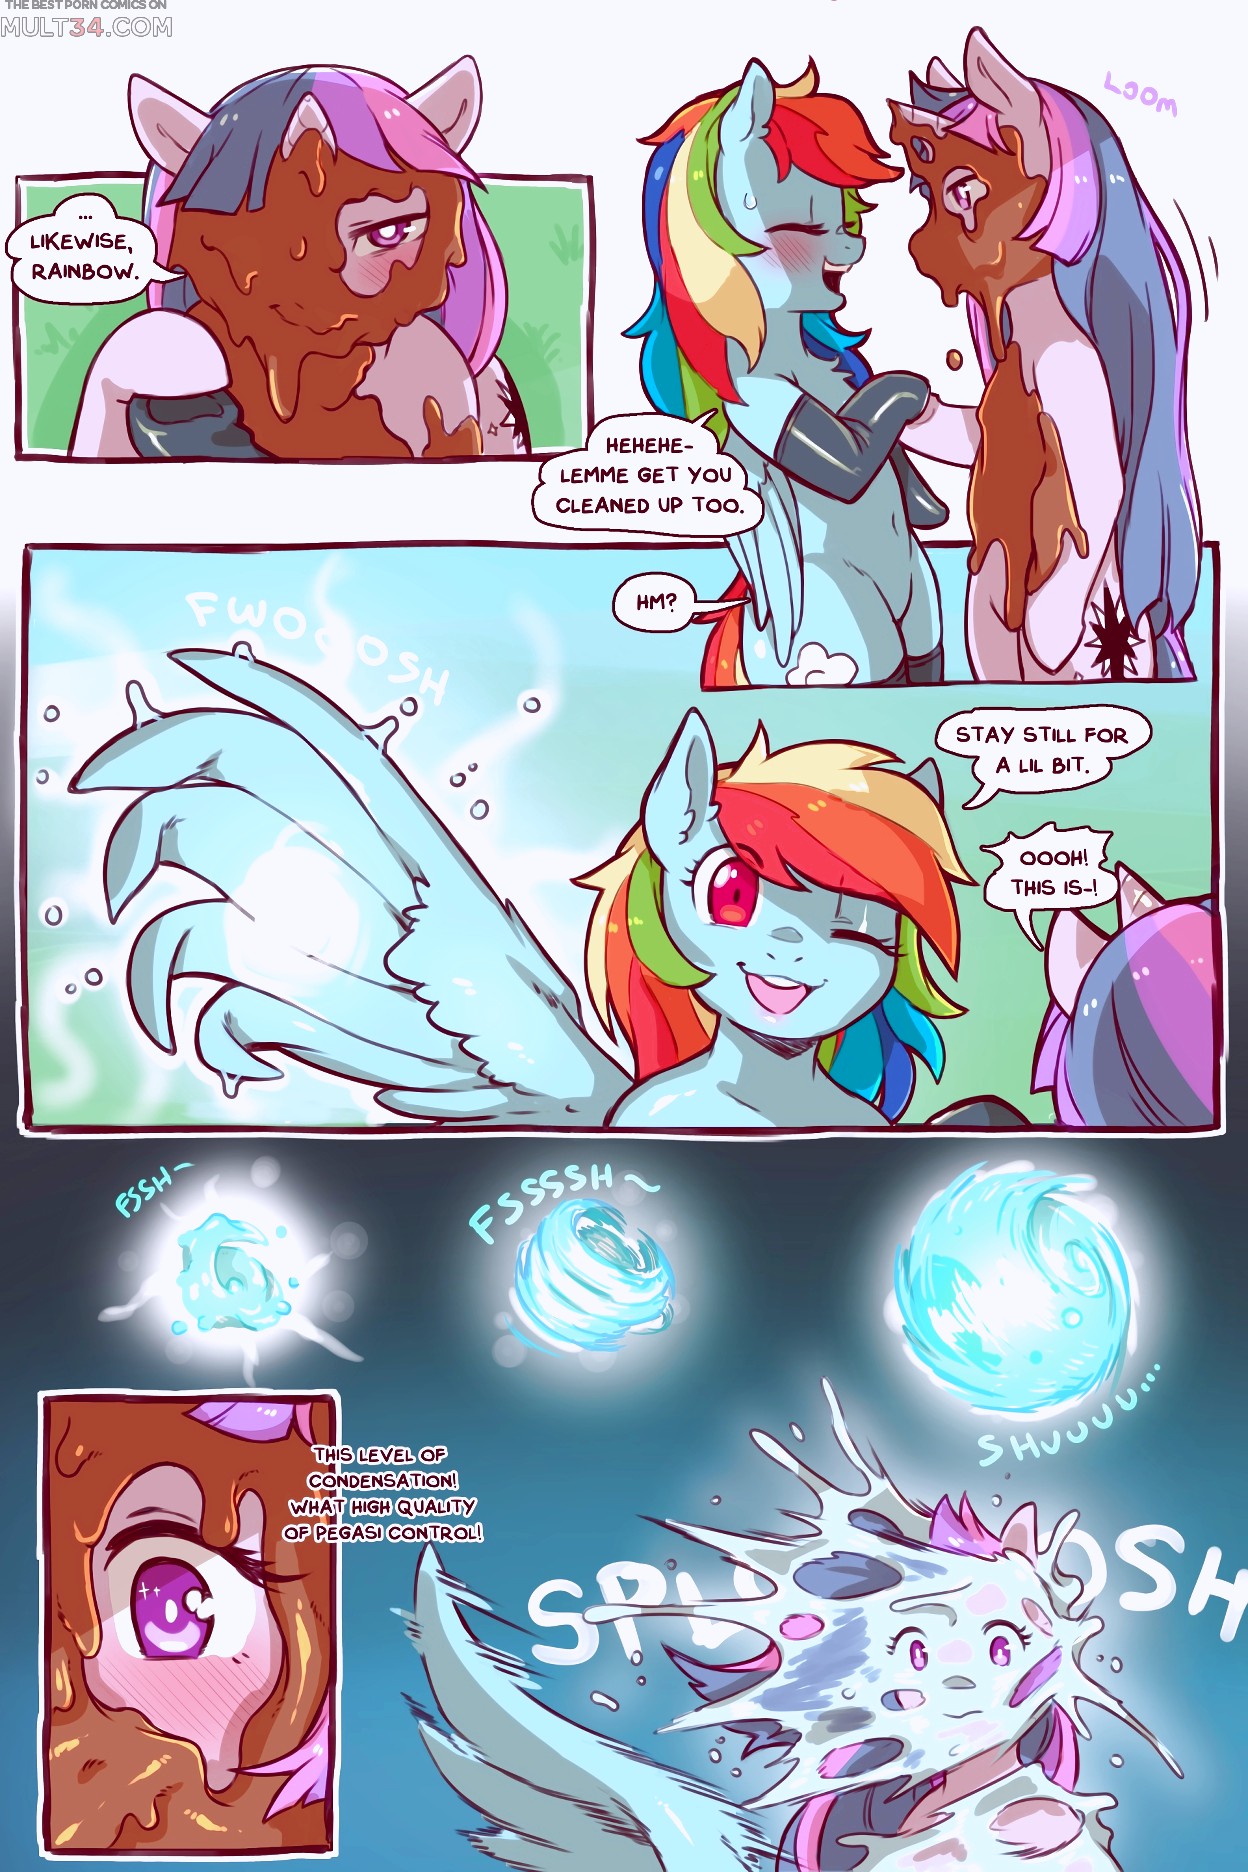 Cold Storm porn comic page 82 on category My Little Pony